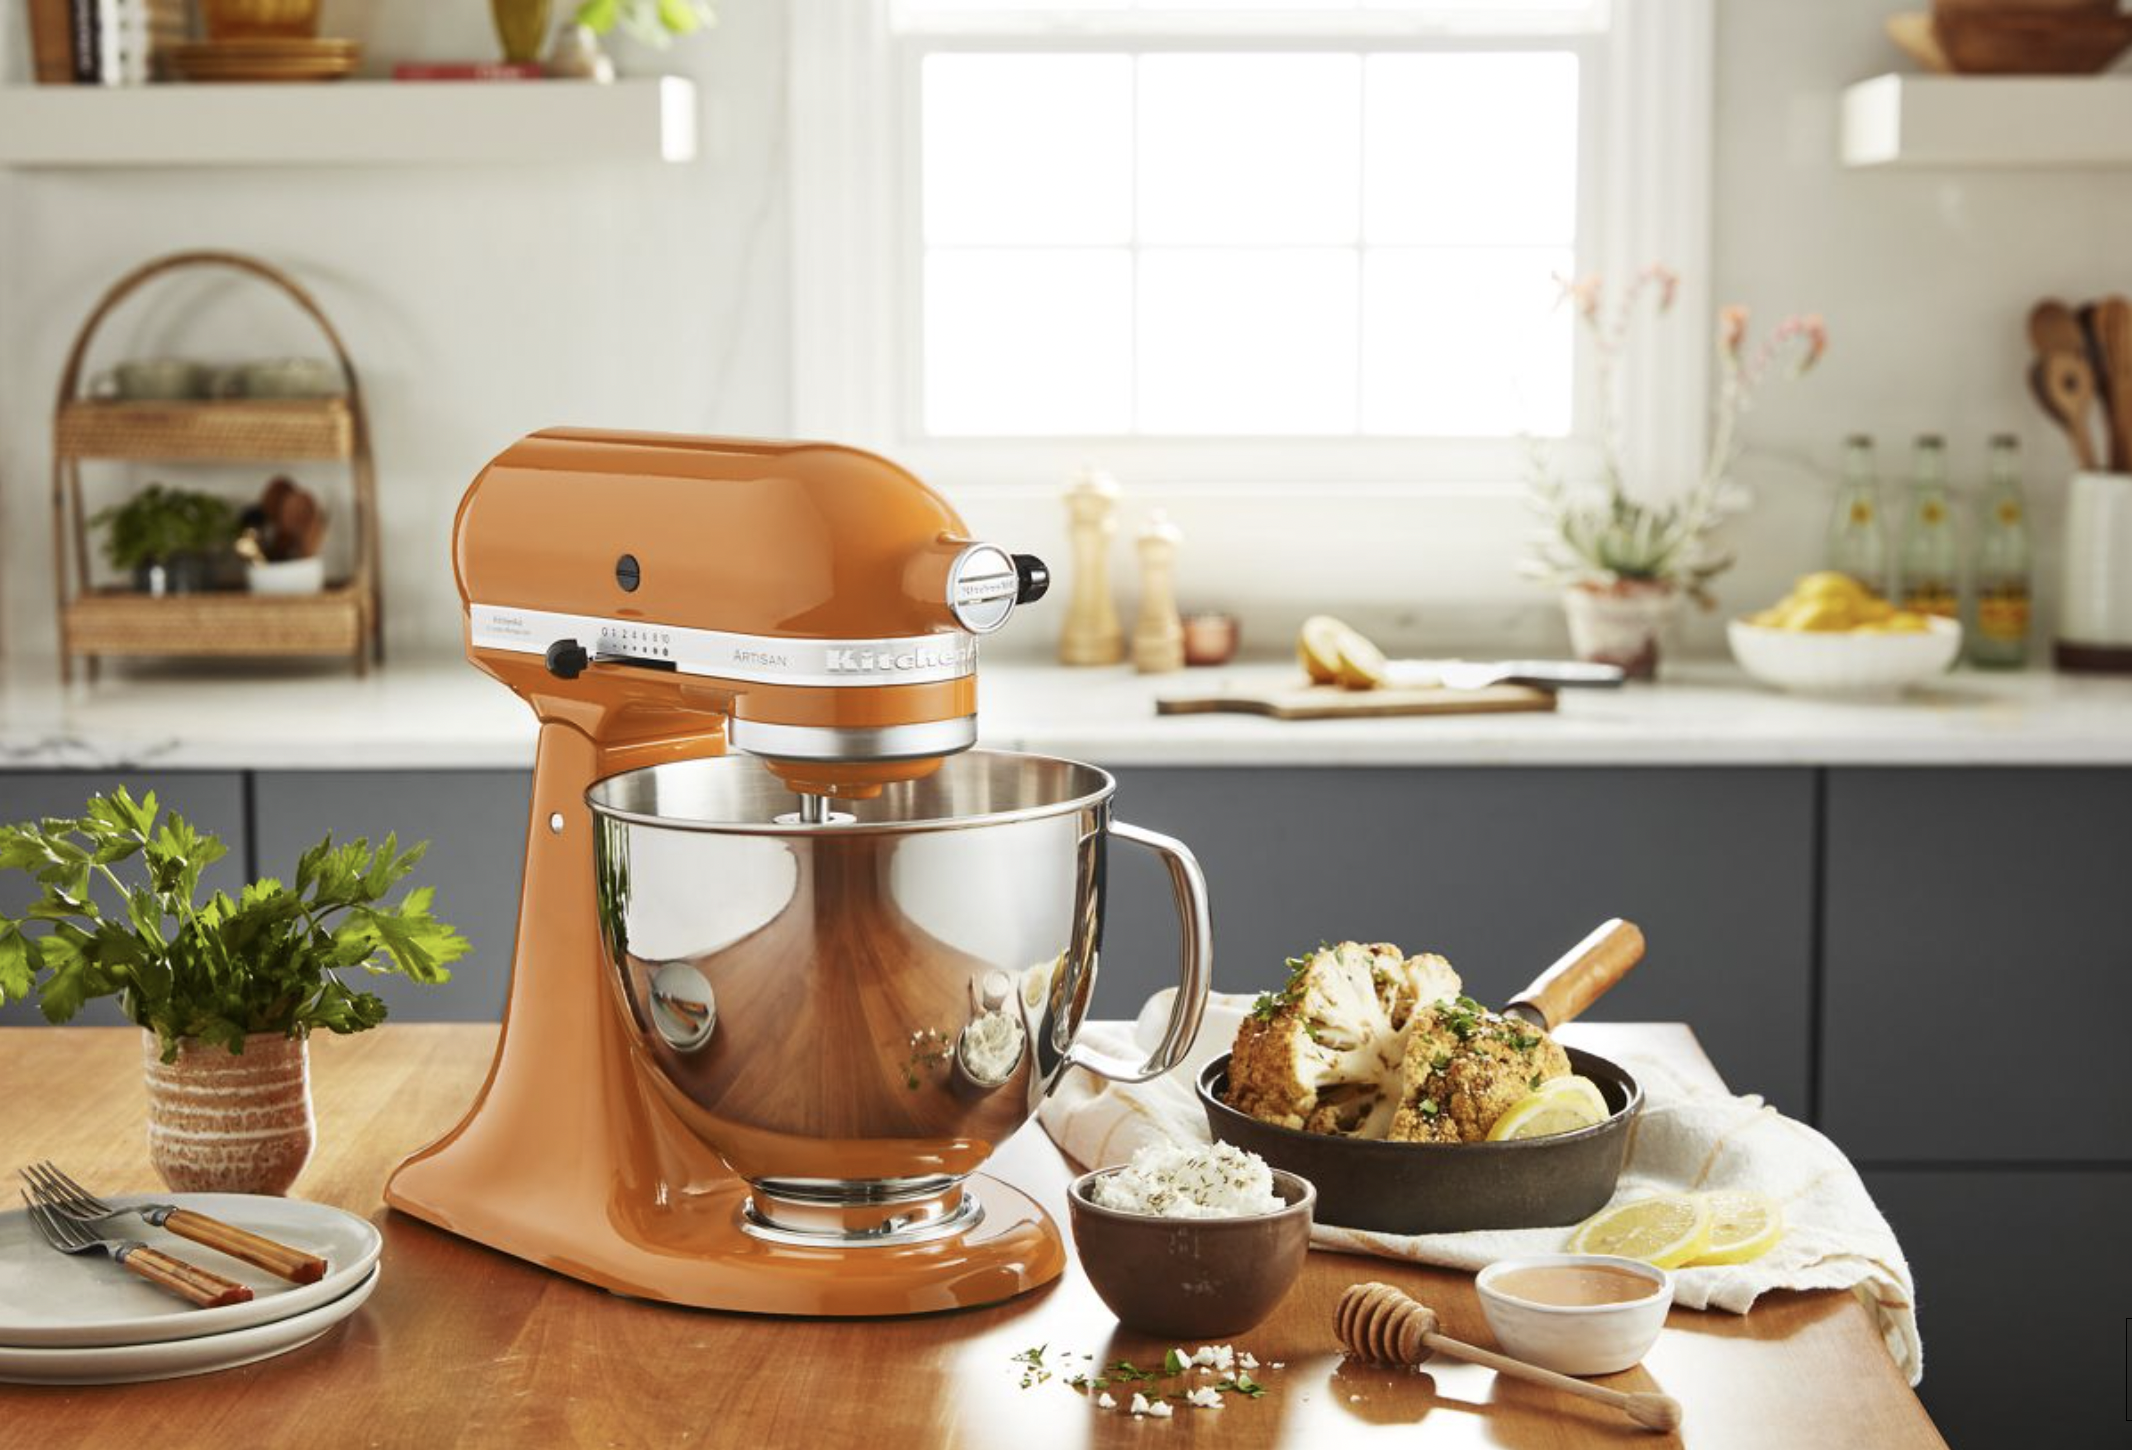 KitchenAid vs Cuisinart stand mixers: which mixer should you